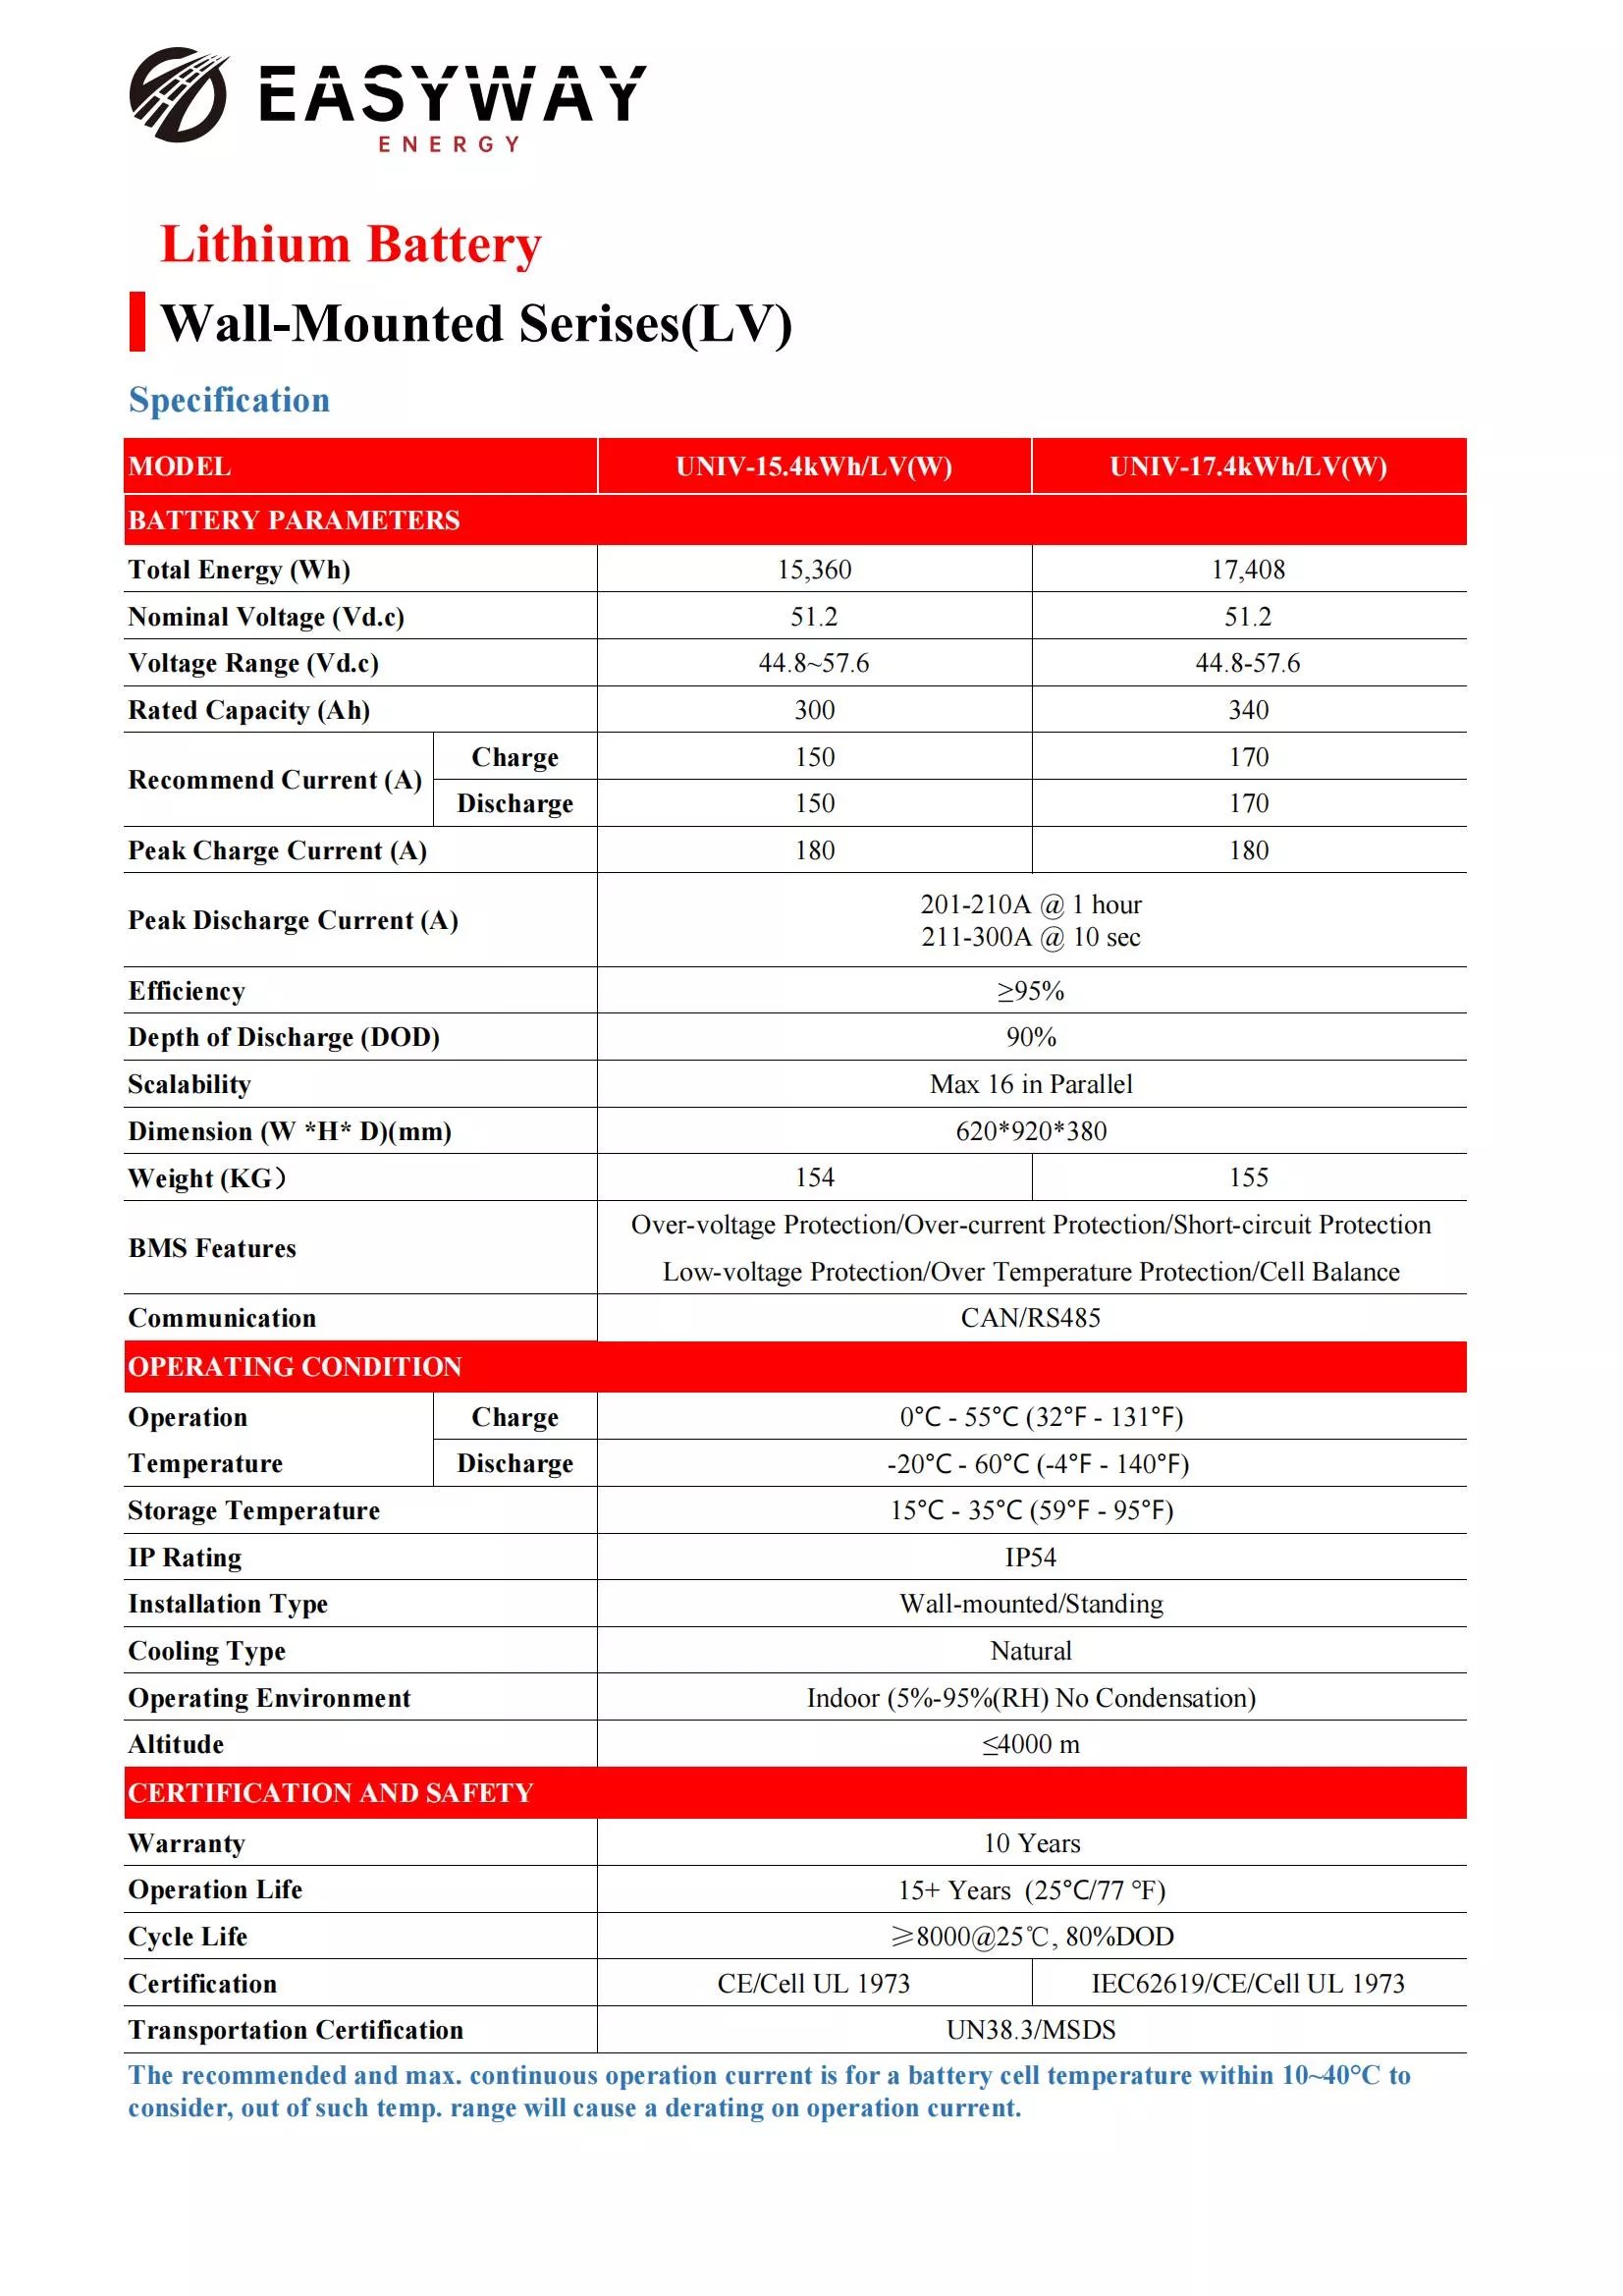 Specification_Easyway_UNIV-17.4kWh